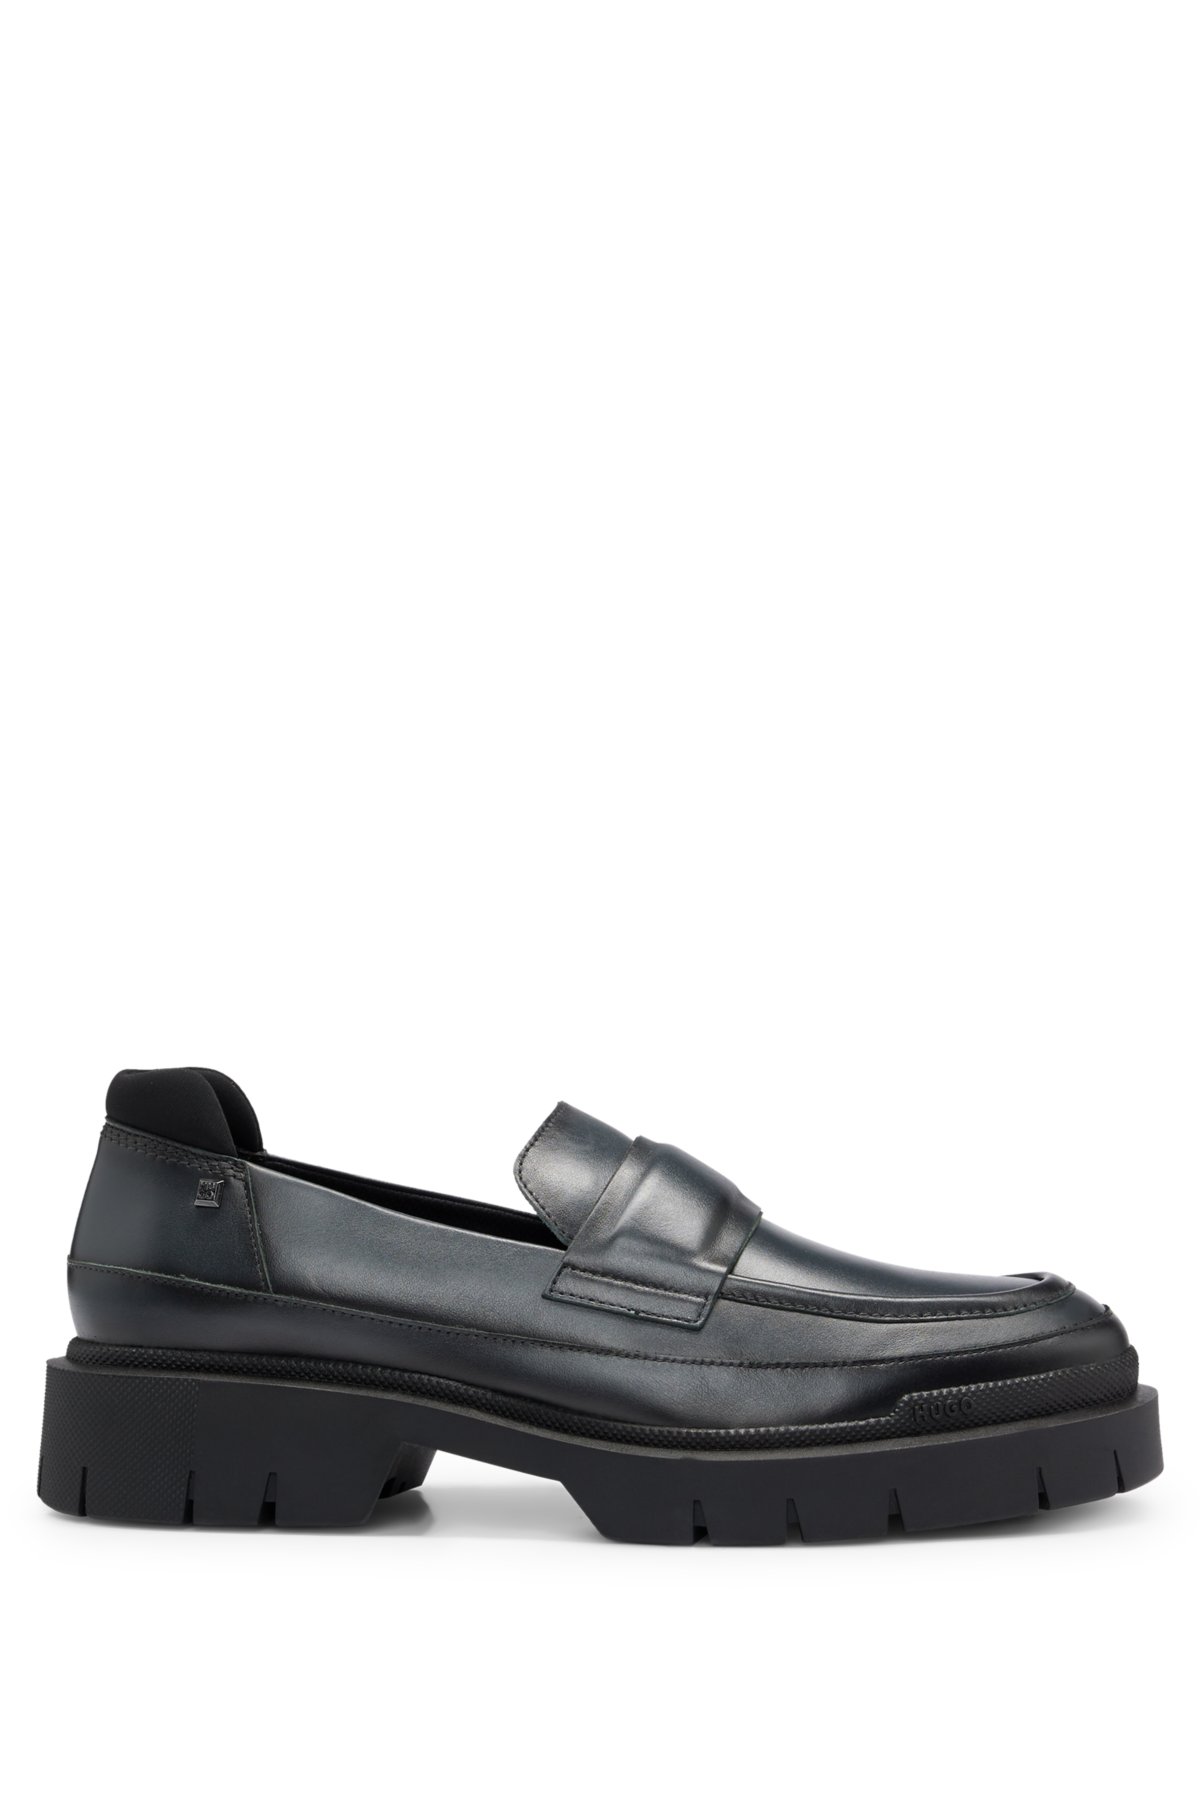 Nappa-leather moccasins with padded penny trim, Dark Grey